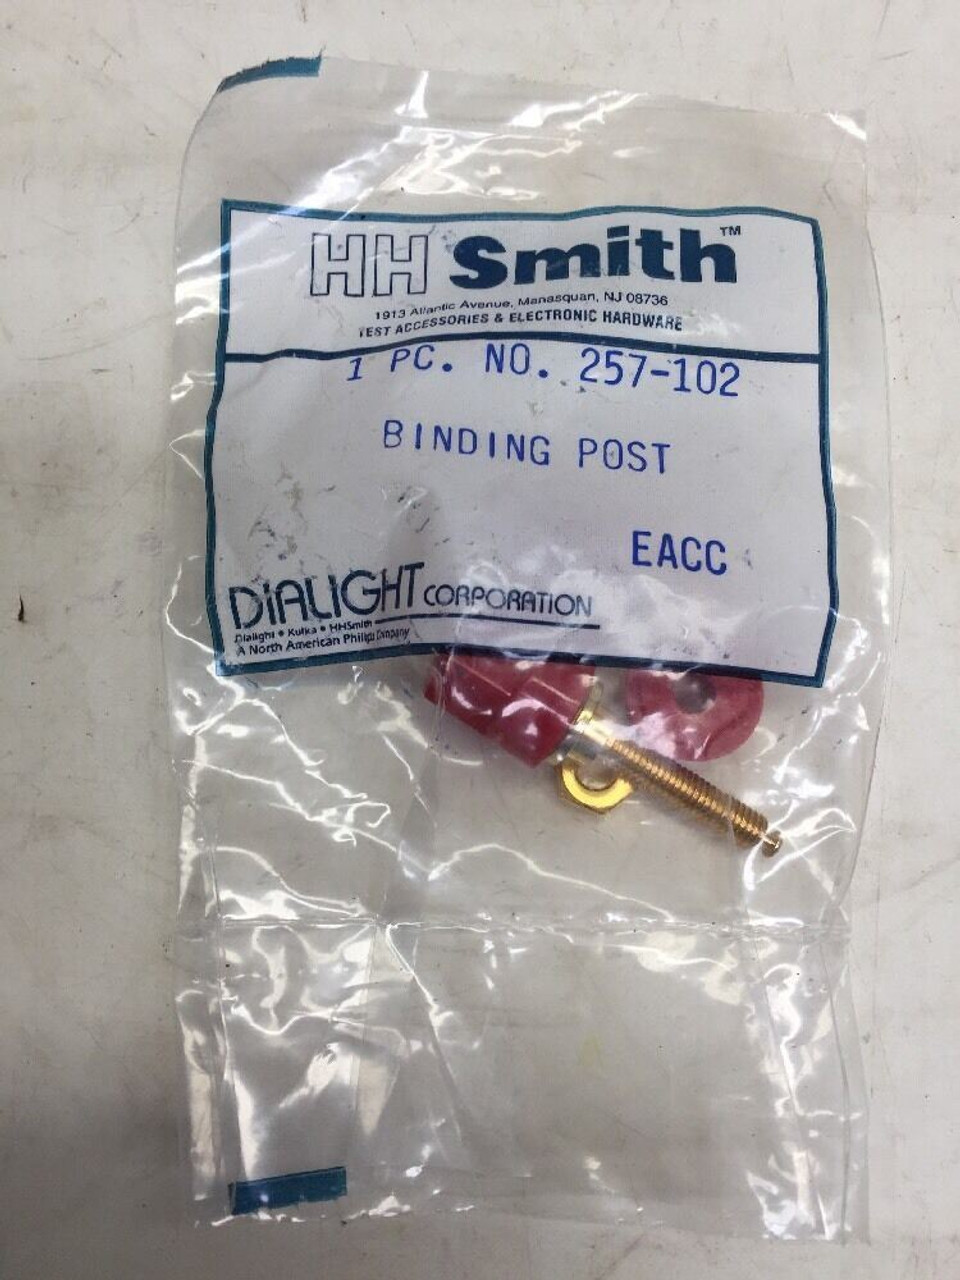 Dialight HH Smith Electrical Binding Post Kit 257-102 Brass Gold Plated 